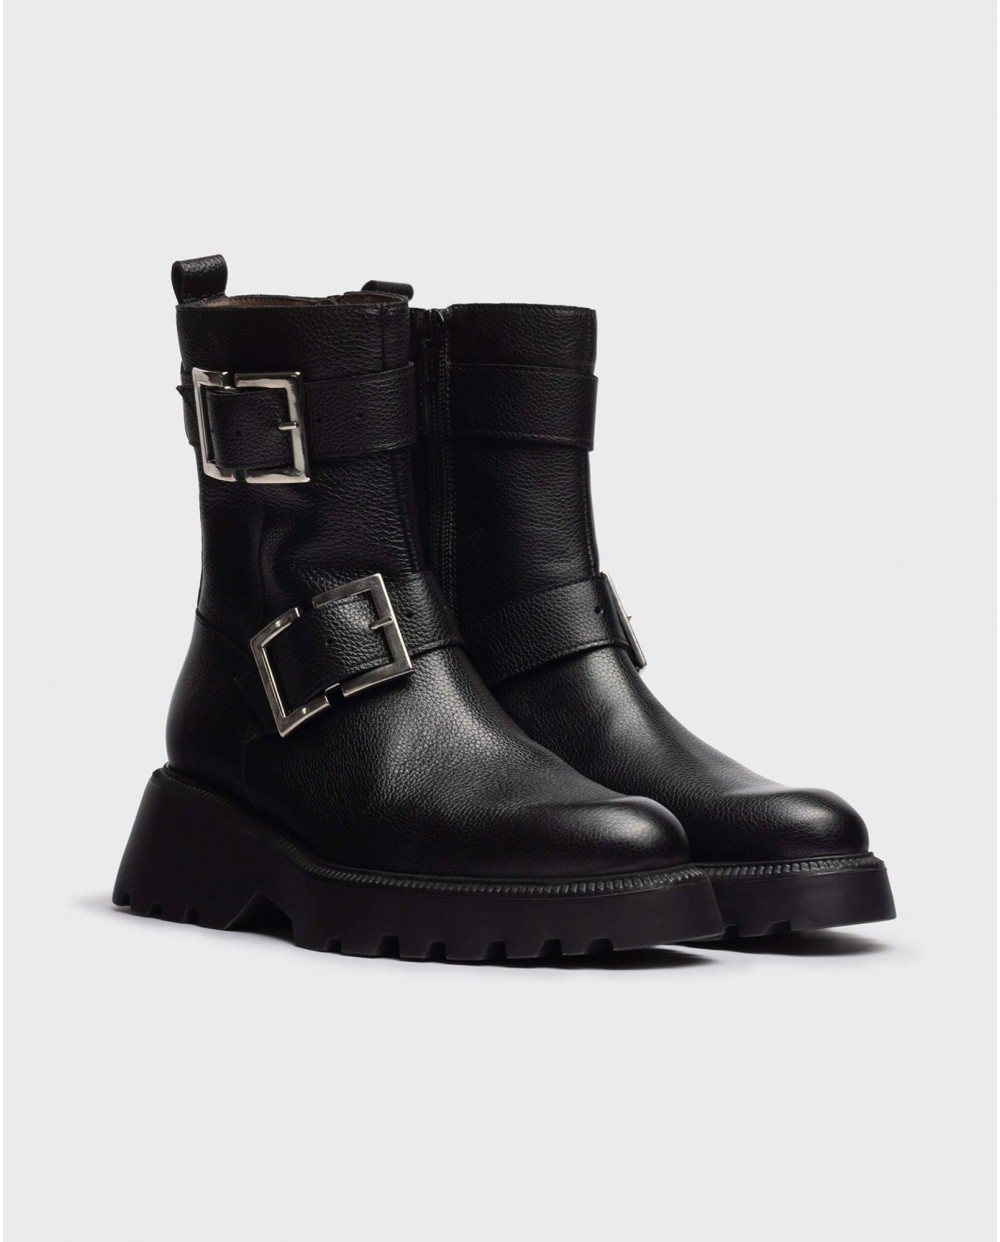 Wonders-Ankle Boots-Black buckle ankle boot